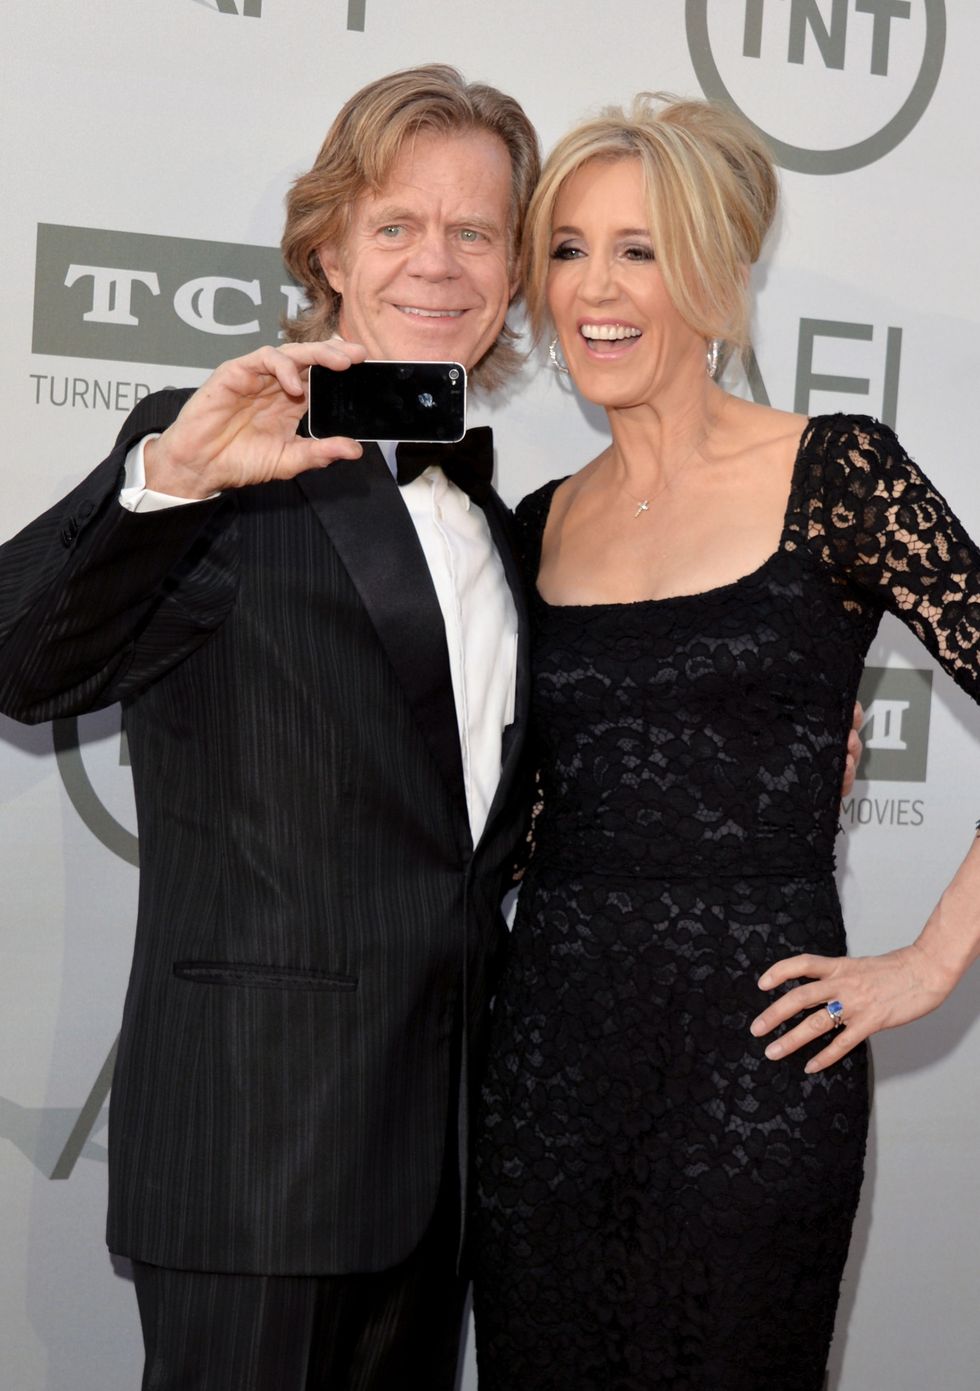 HOLLYWOOD, CA - JUNE 05:  Actors William H. Macy (L) and Felicity Huffman take a selfie photo at the 2014 AFI Life Achievement Award: A Tribute to Jane Fonda at the Dolby Theatre on June 5, 2014 in Hollywood, California. Tribute show airing Saturday, June 14, 2014 at 9pm ET/PT on TNT.  (Photo by Lester Cohen/WireImage)